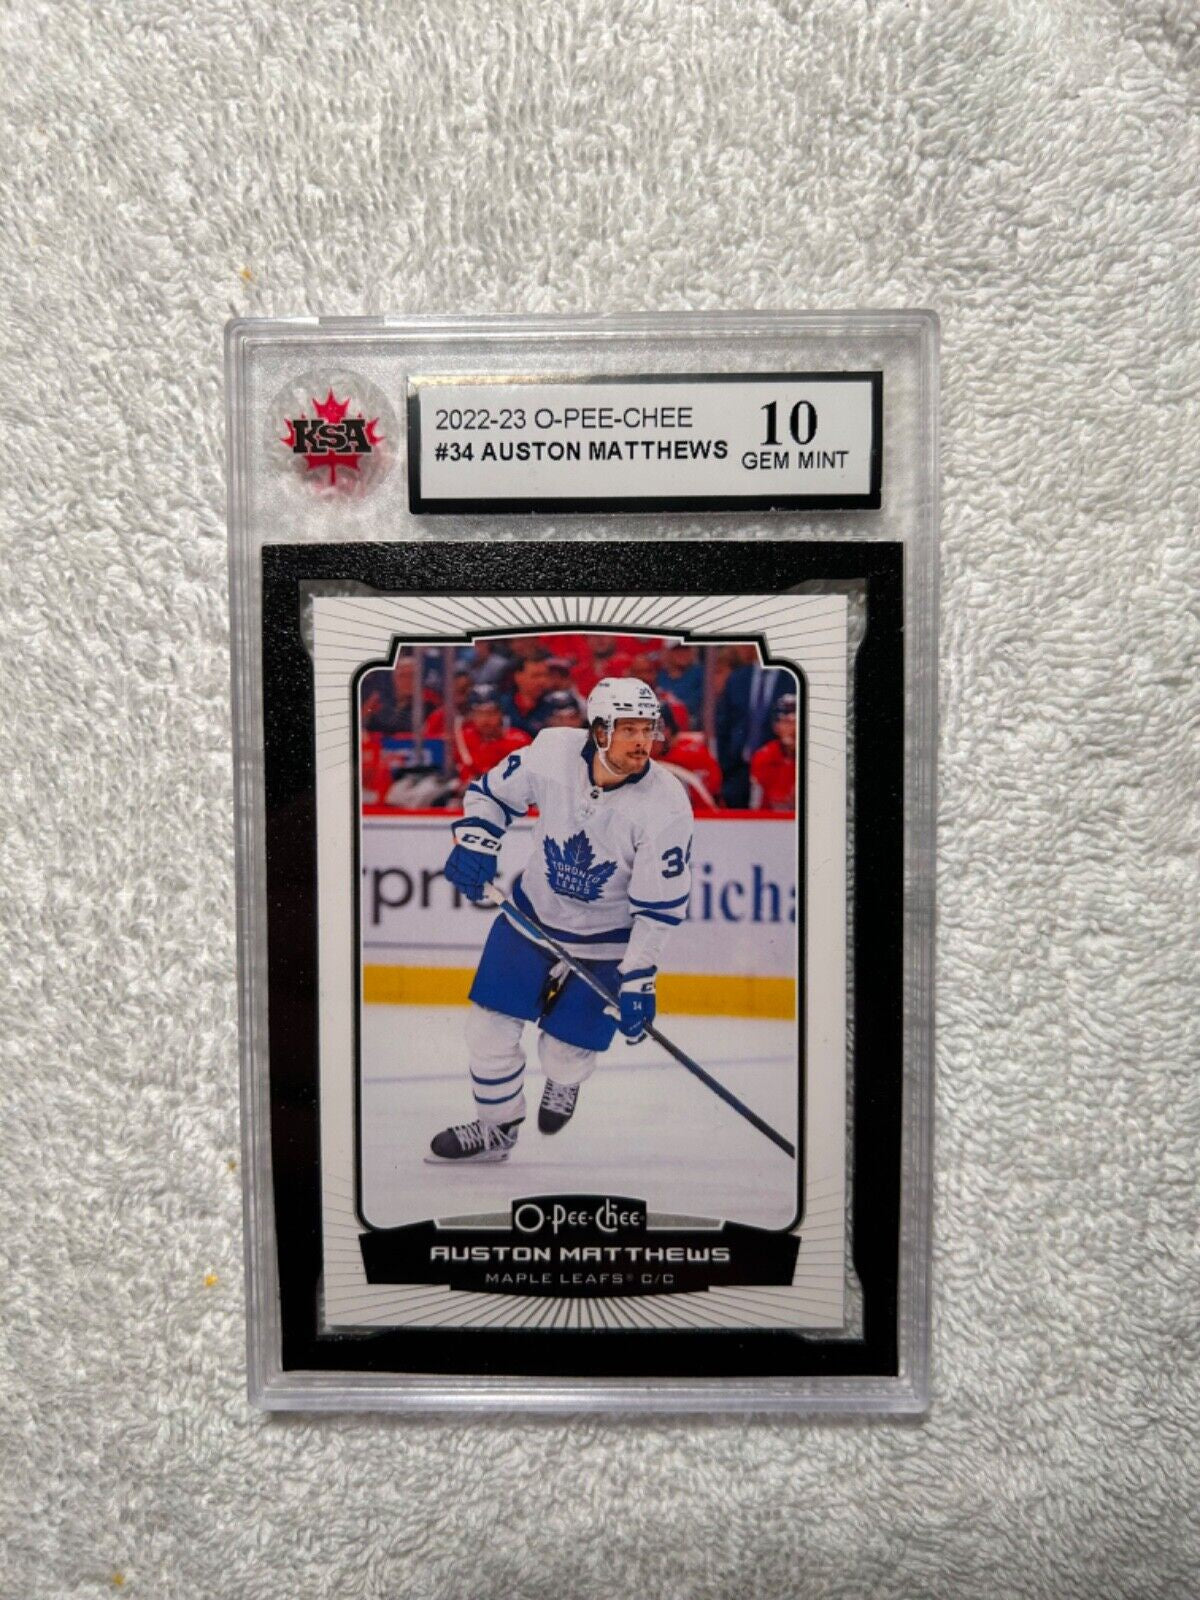 Auston Matthews - Toronto Maple Leafs GRADED NHL Hockey REPACK - 1x Sports Card Single (Graded 9 or higher, Various Grading Companies, Randomly Selected, Stock Photo - May Not Get Card In Picture)